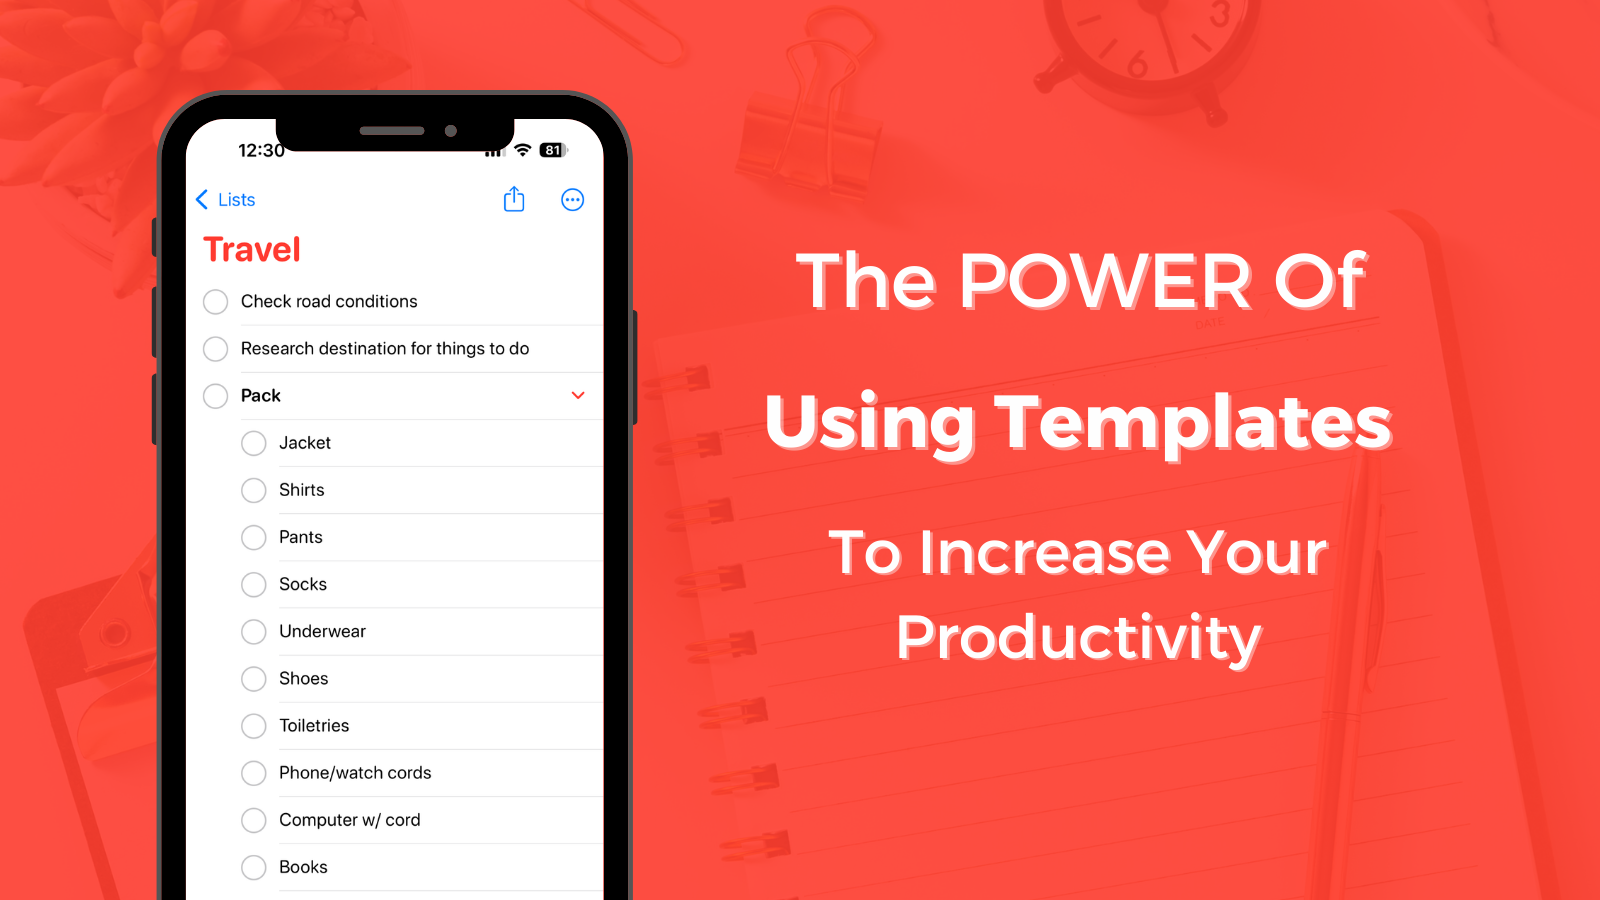 The Power of Using Templates to Increase Your Productivity